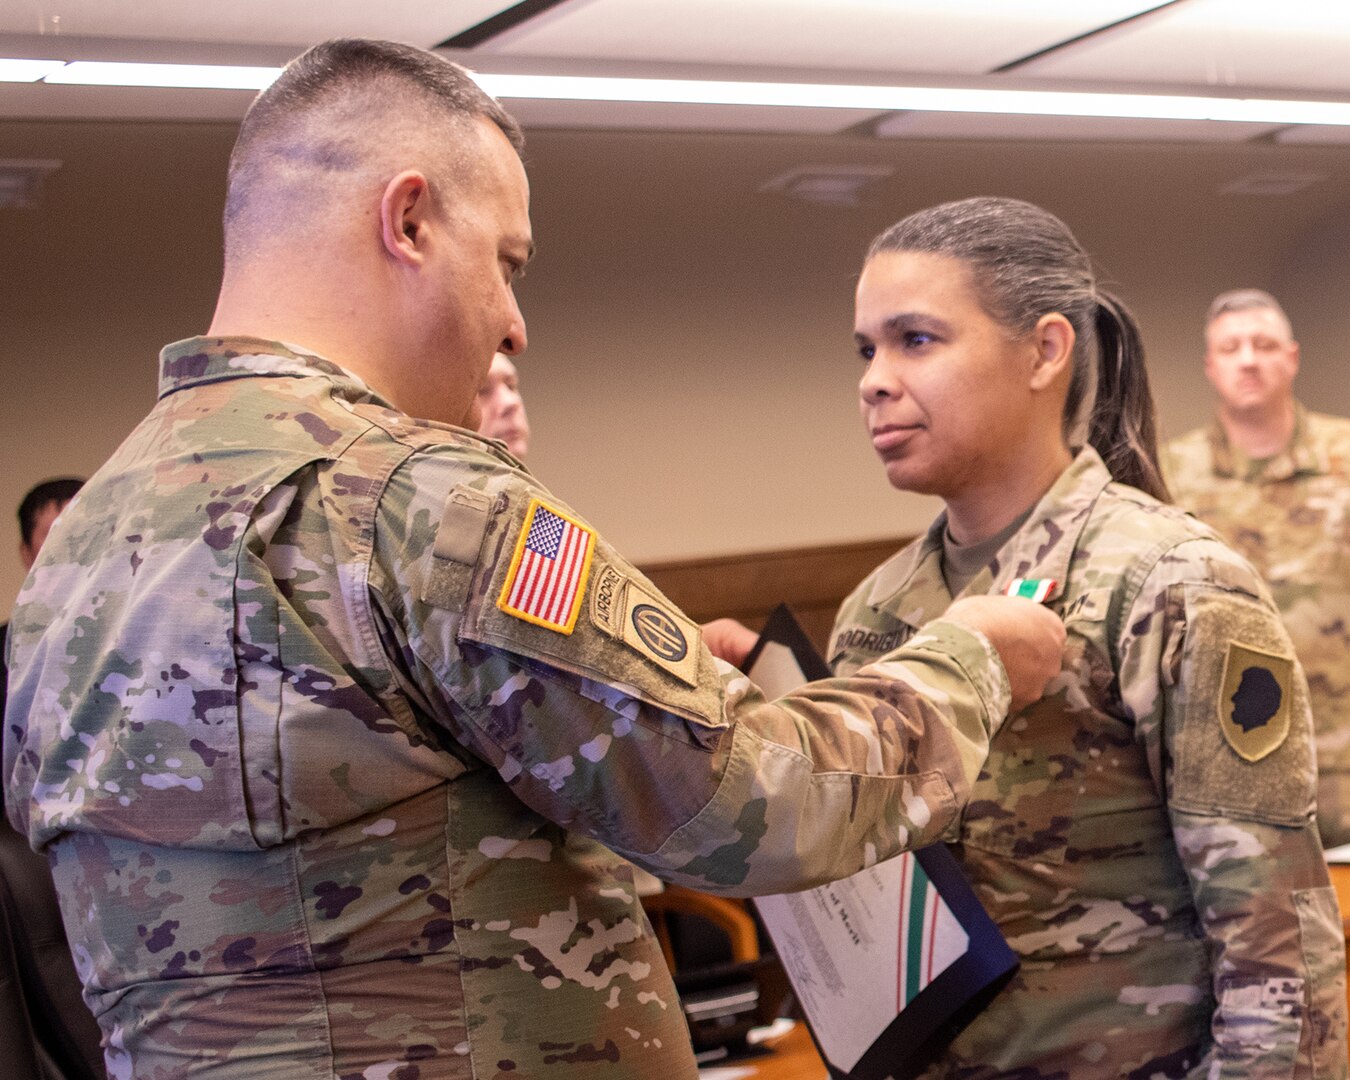 Brig. Gen. Mark Alessia, of Sherman, Illinois, Director of the Illinois National Guard Joint Staff, presents Capt. Crystal Rodrigues, of Pawnee, Illinois, Director of the Illinois National Guard State Partnership Program, with the Illinois Military Medal of Merit at a ceremony Dec. 5 at Joint Force Headquarters, Camp Lincoln, Springfield, Illinois.